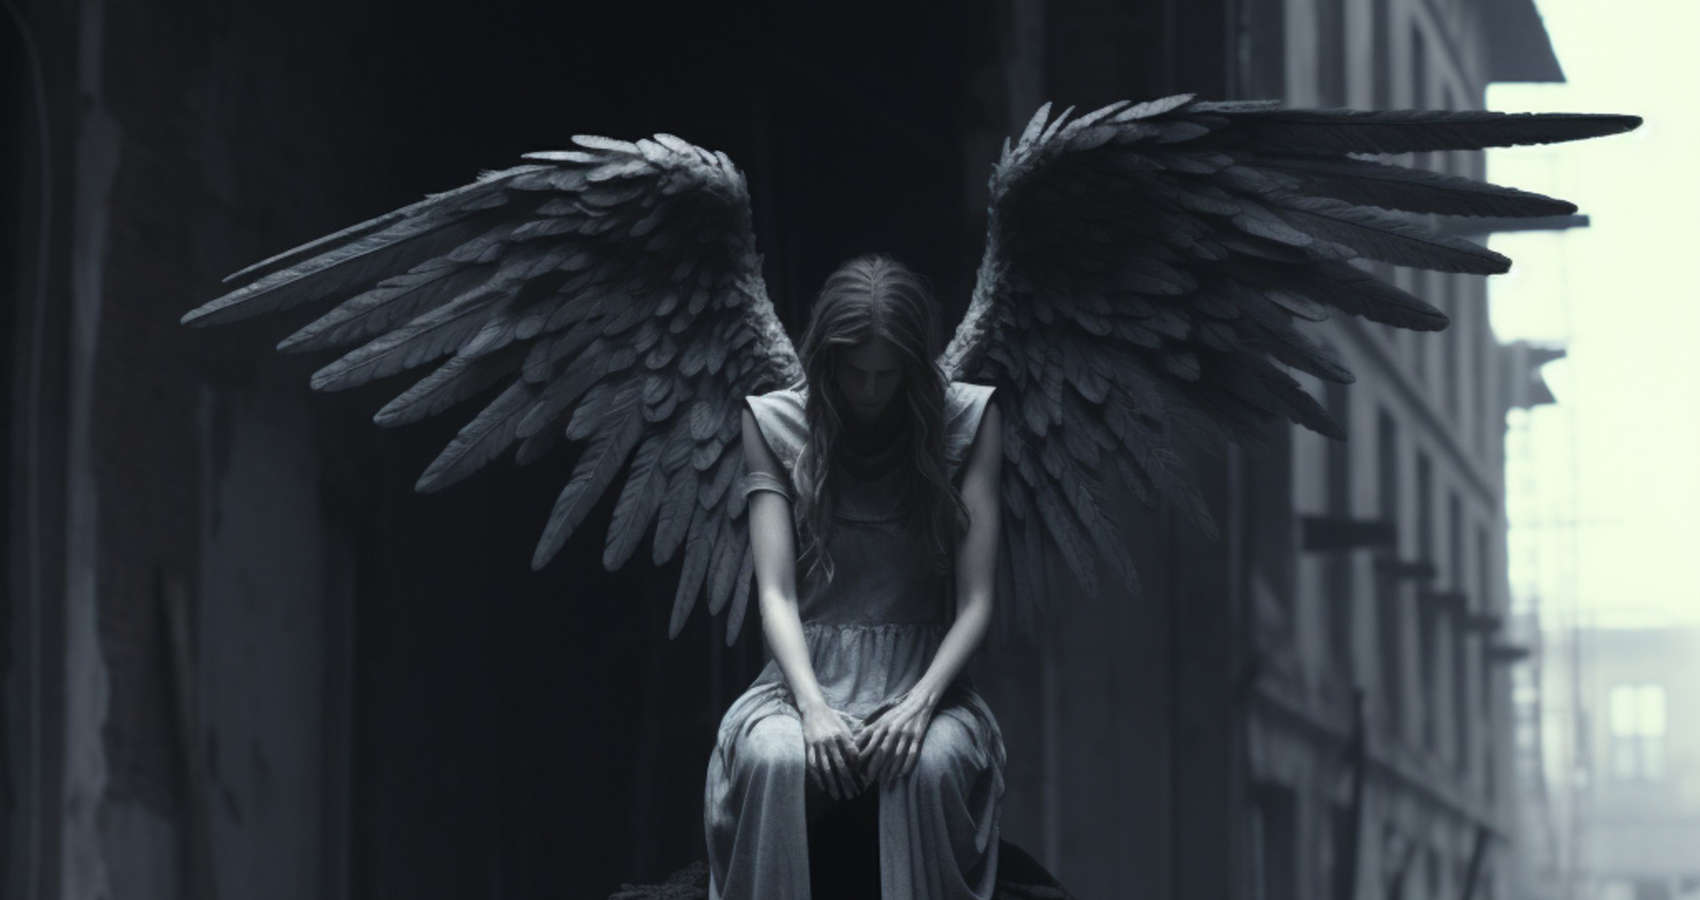 Wounded Angel, poetry written by Cristina Munoz at Spillwords.com